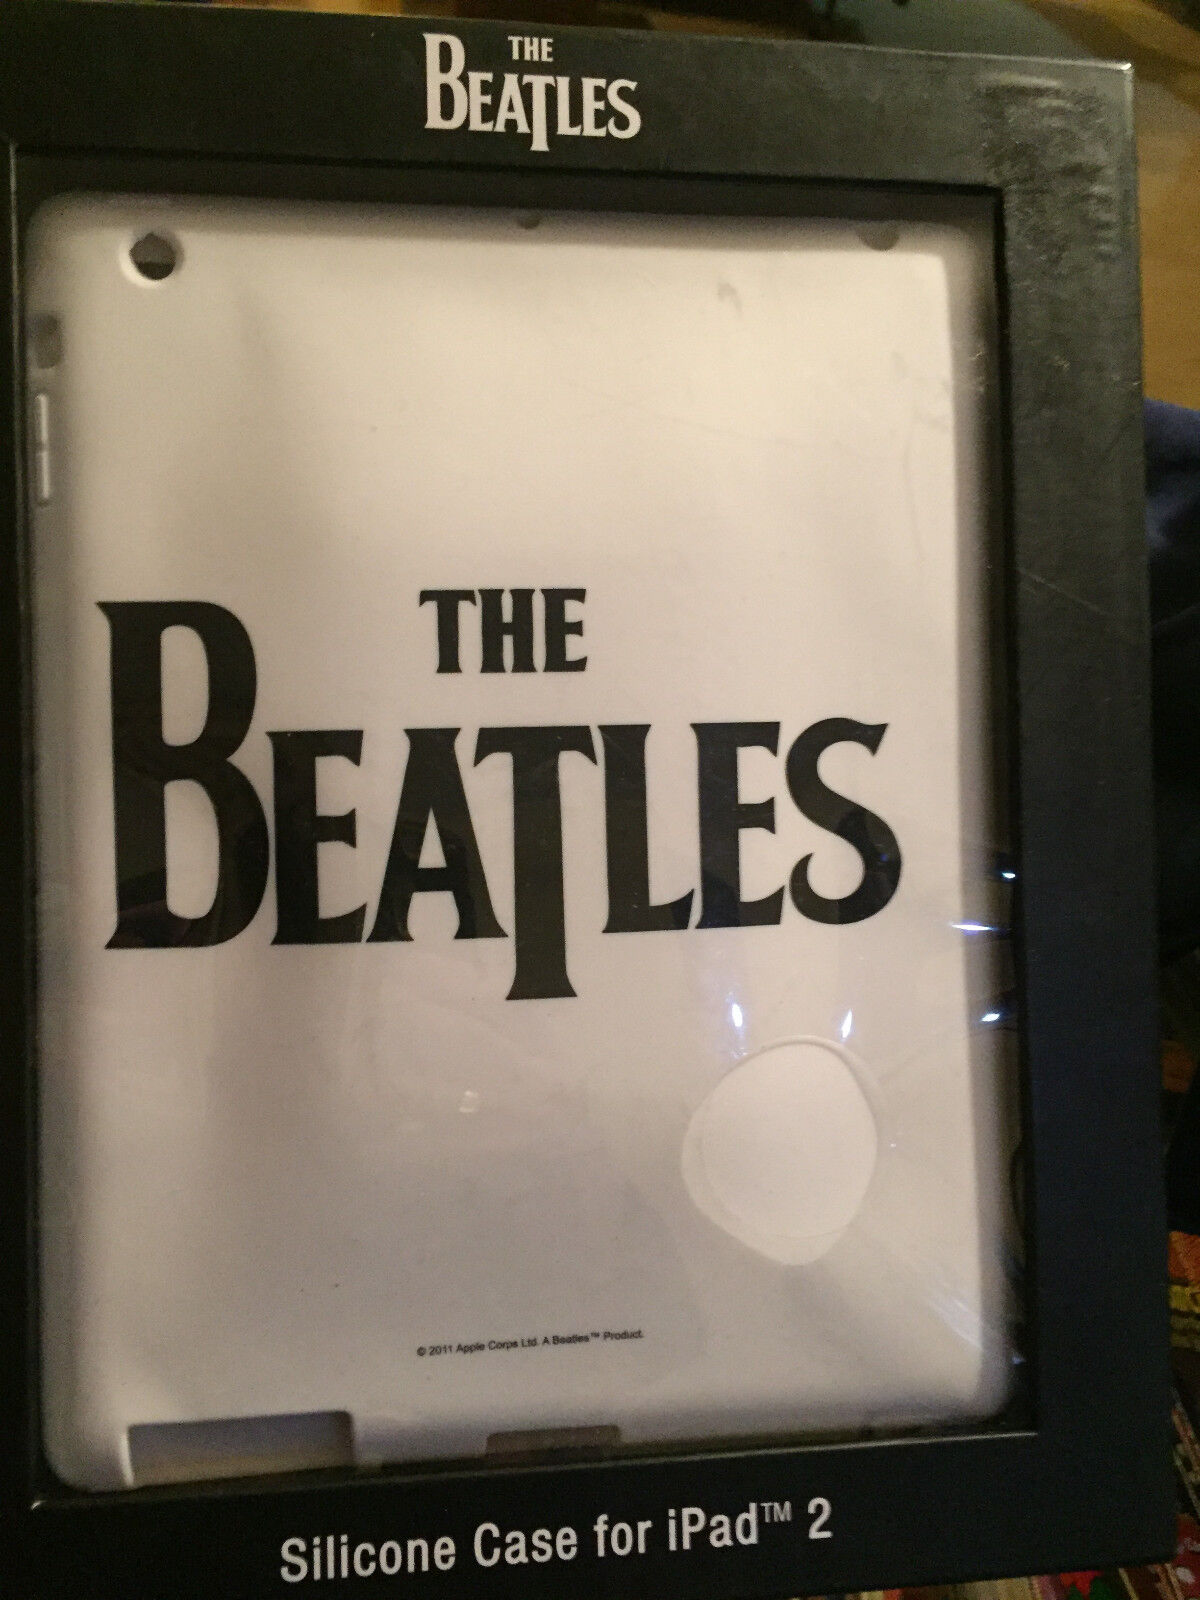 The Beatles ----New Hard Shell Snap On Case For Ipad 2 